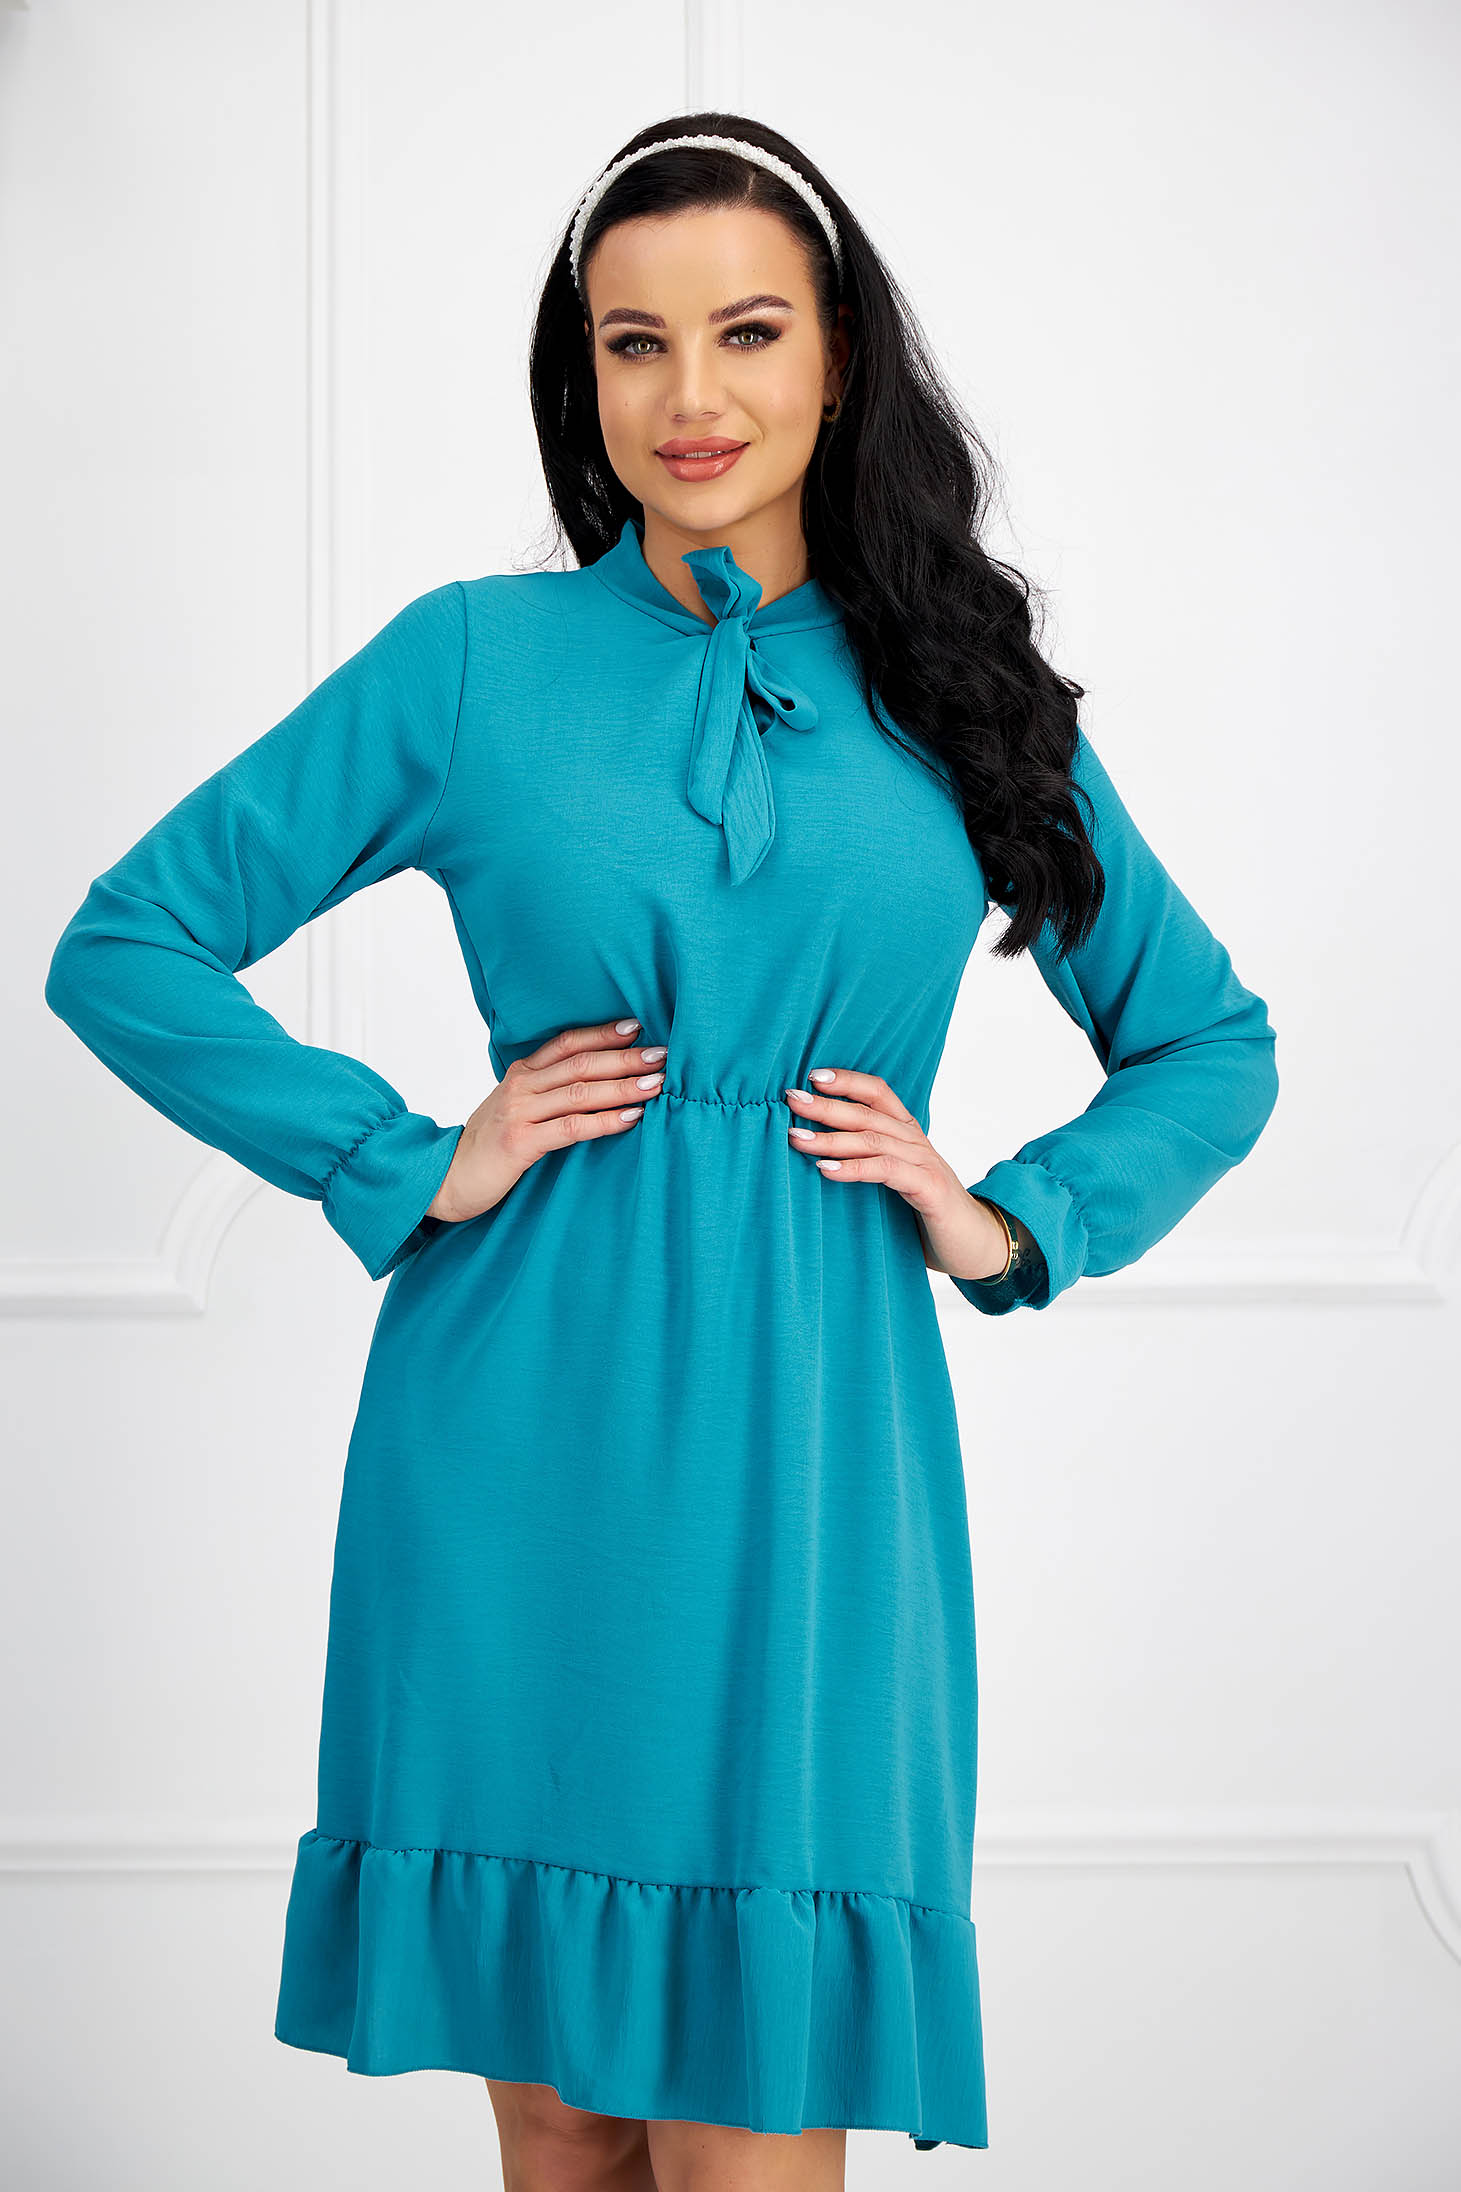 Turquoise Georgette Dress in A-line with Elastic Waist and Scarf-like Collar - Lady Pandora 6 - StarShinerS.com